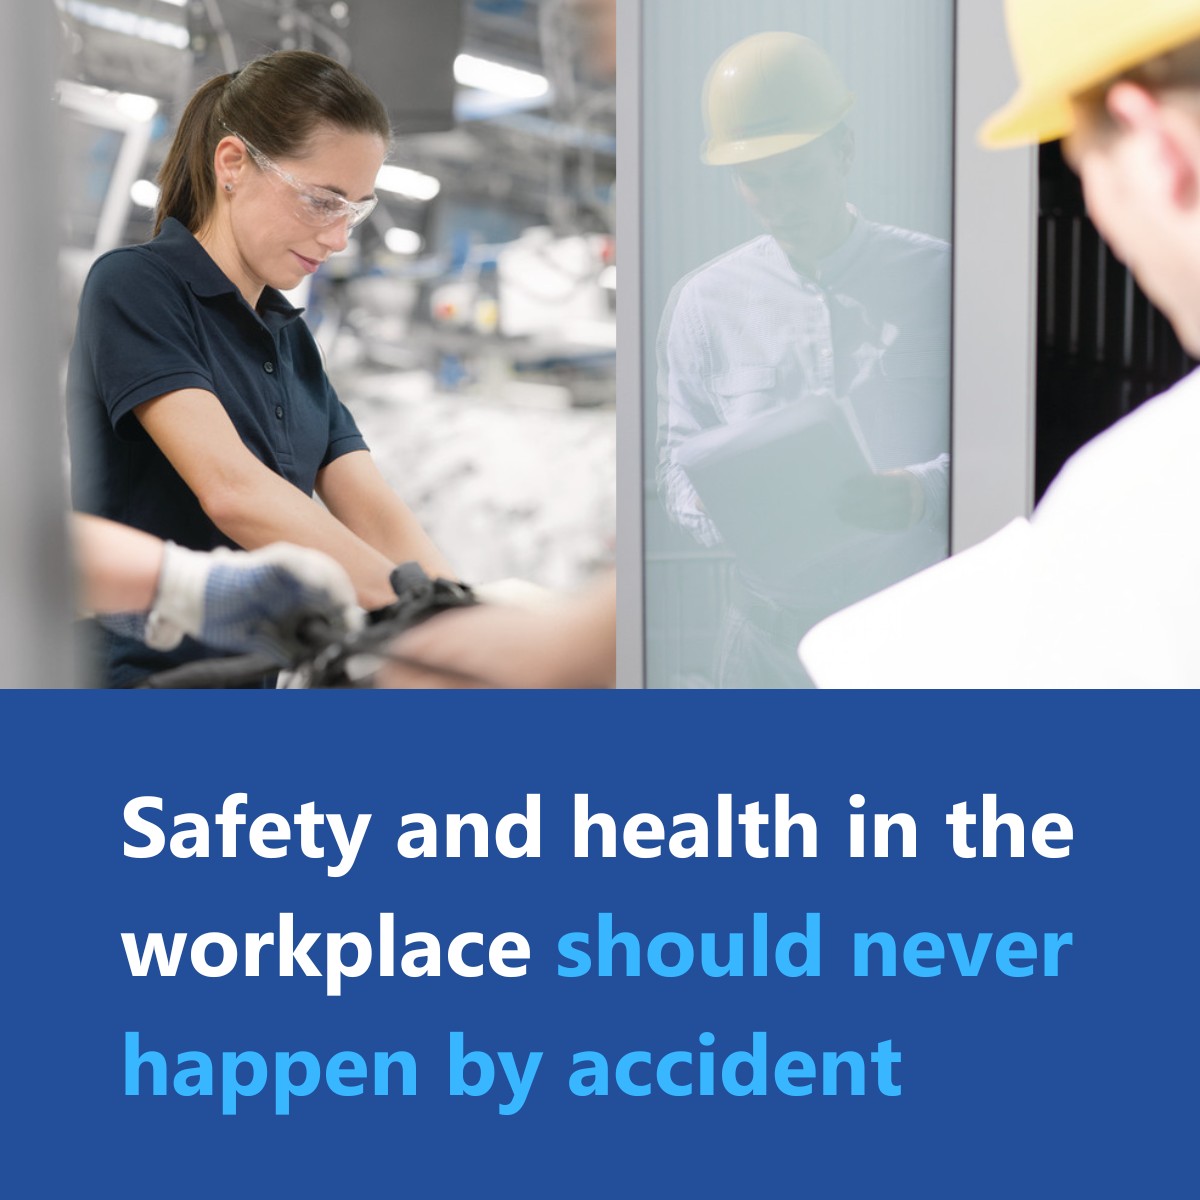 Stay safe by choice, not by chance: The annual World Day for Safety and Health at Work #worldsafetyday on 28 April reminds us all of the ongoing importance of protecting against injury in the workplace.